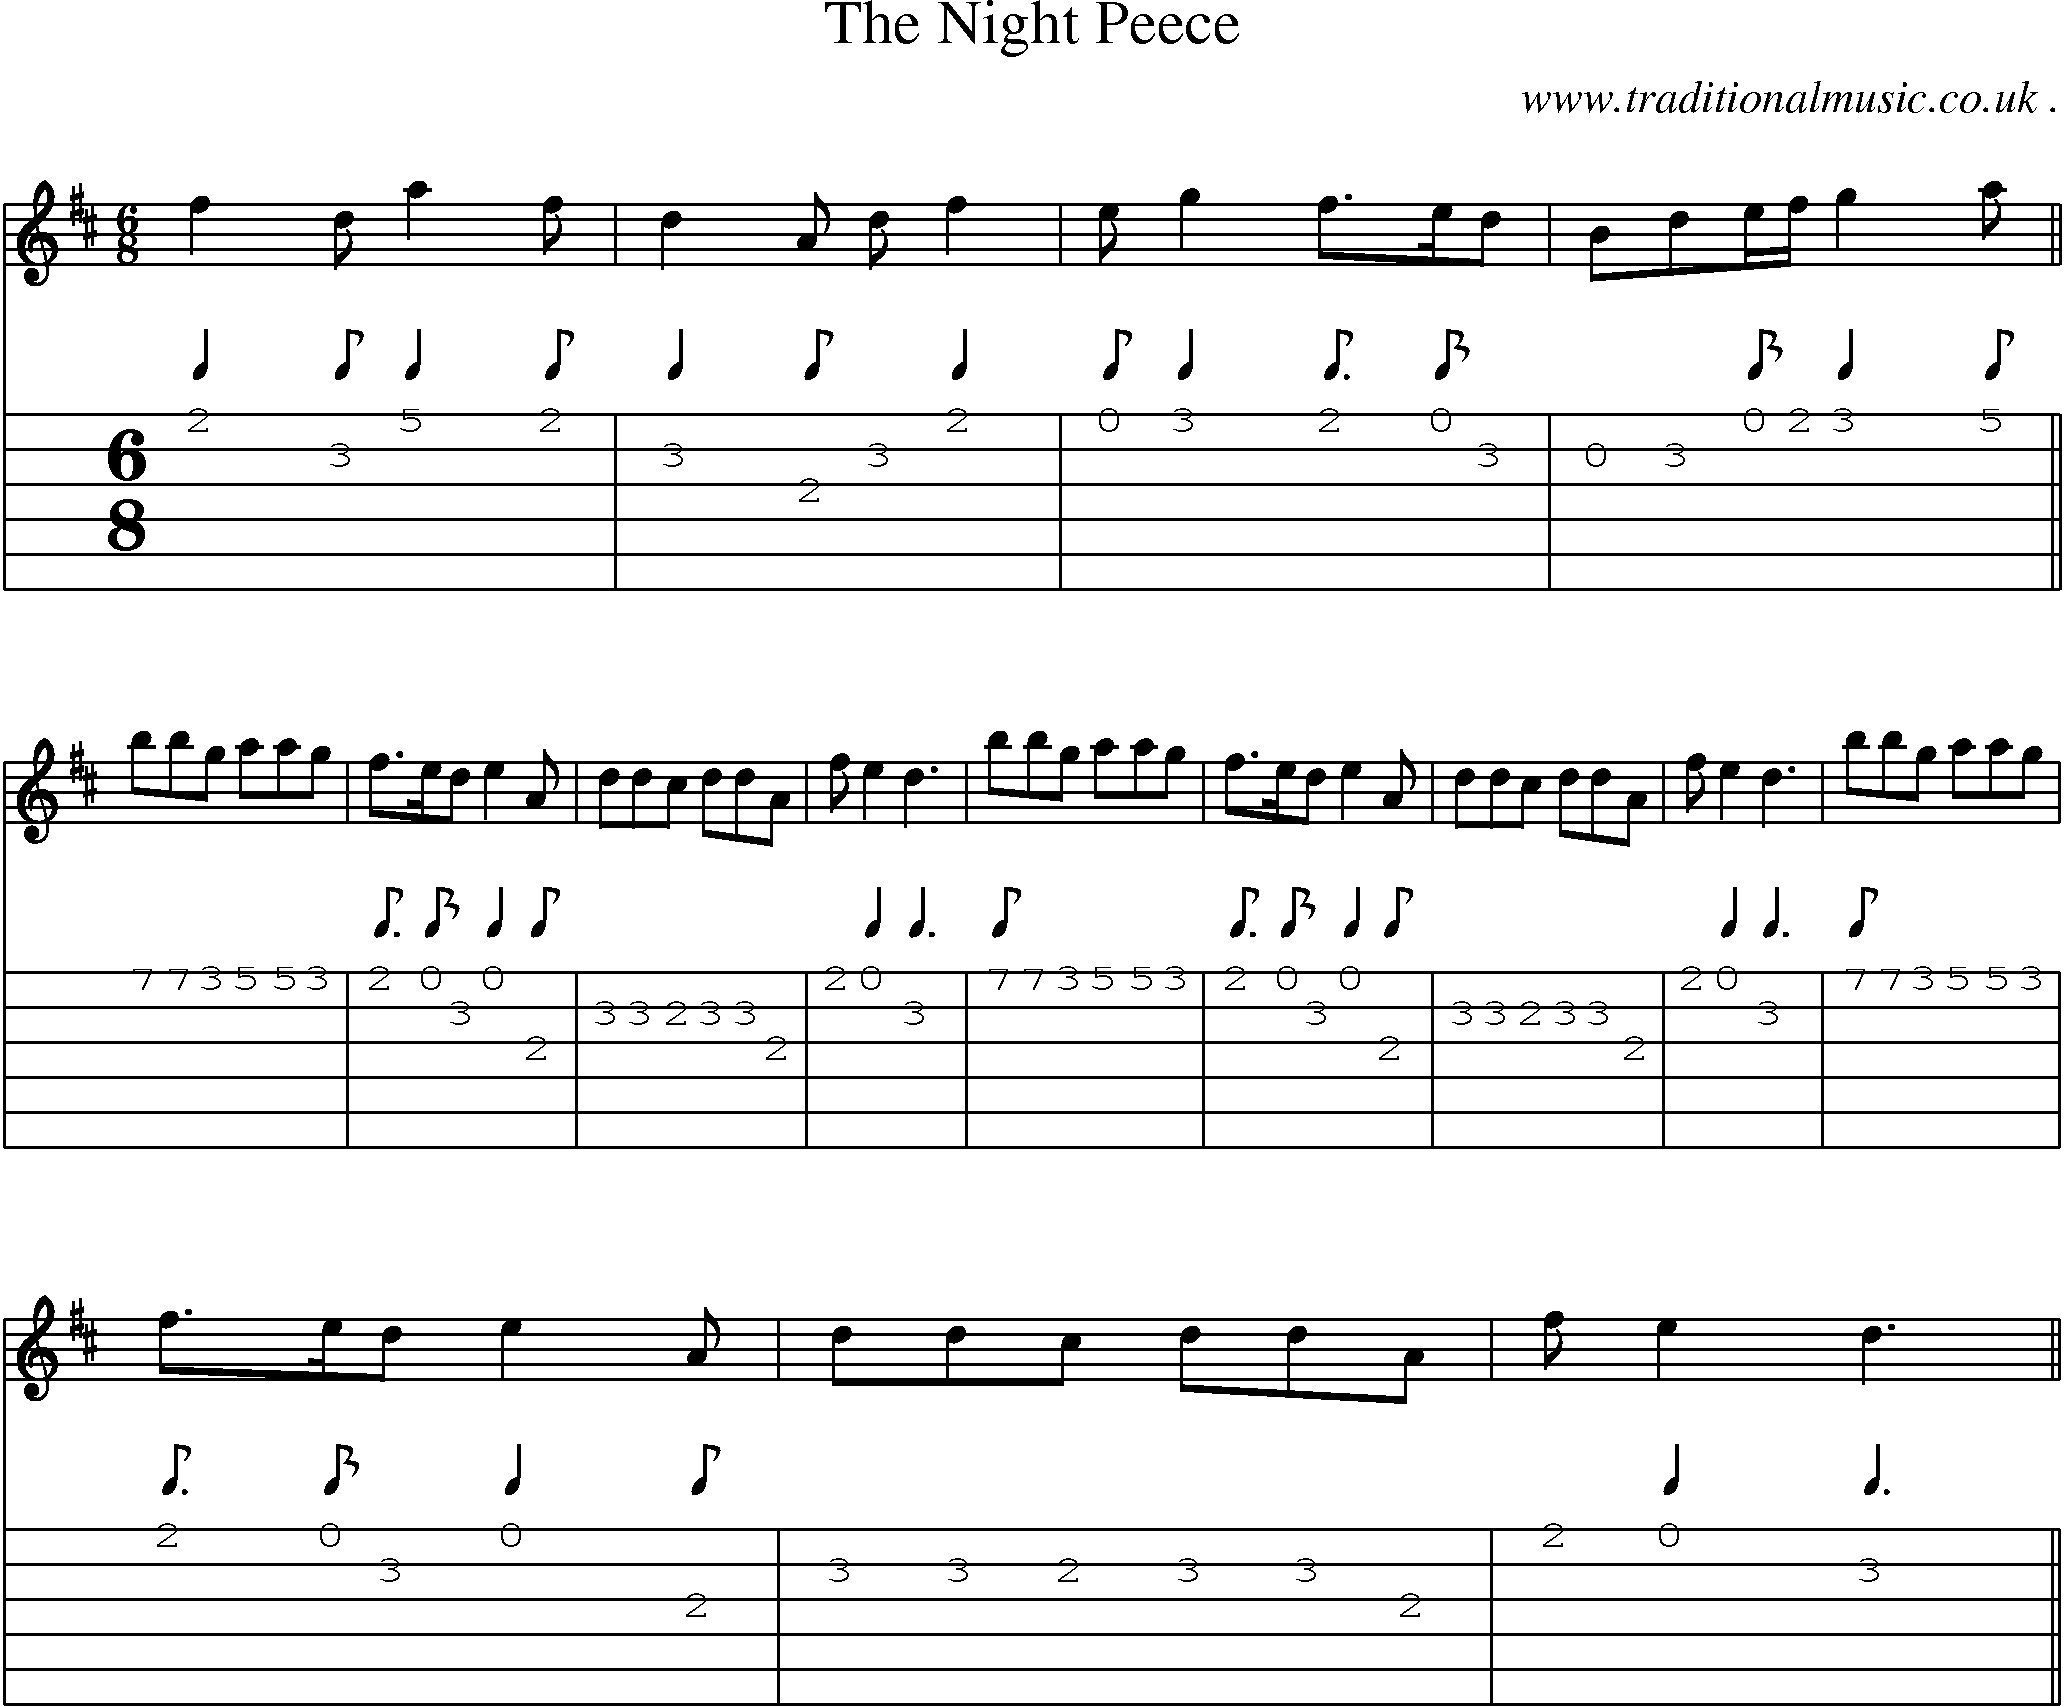 Sheet-Music and Guitar Tabs for The Night Peece